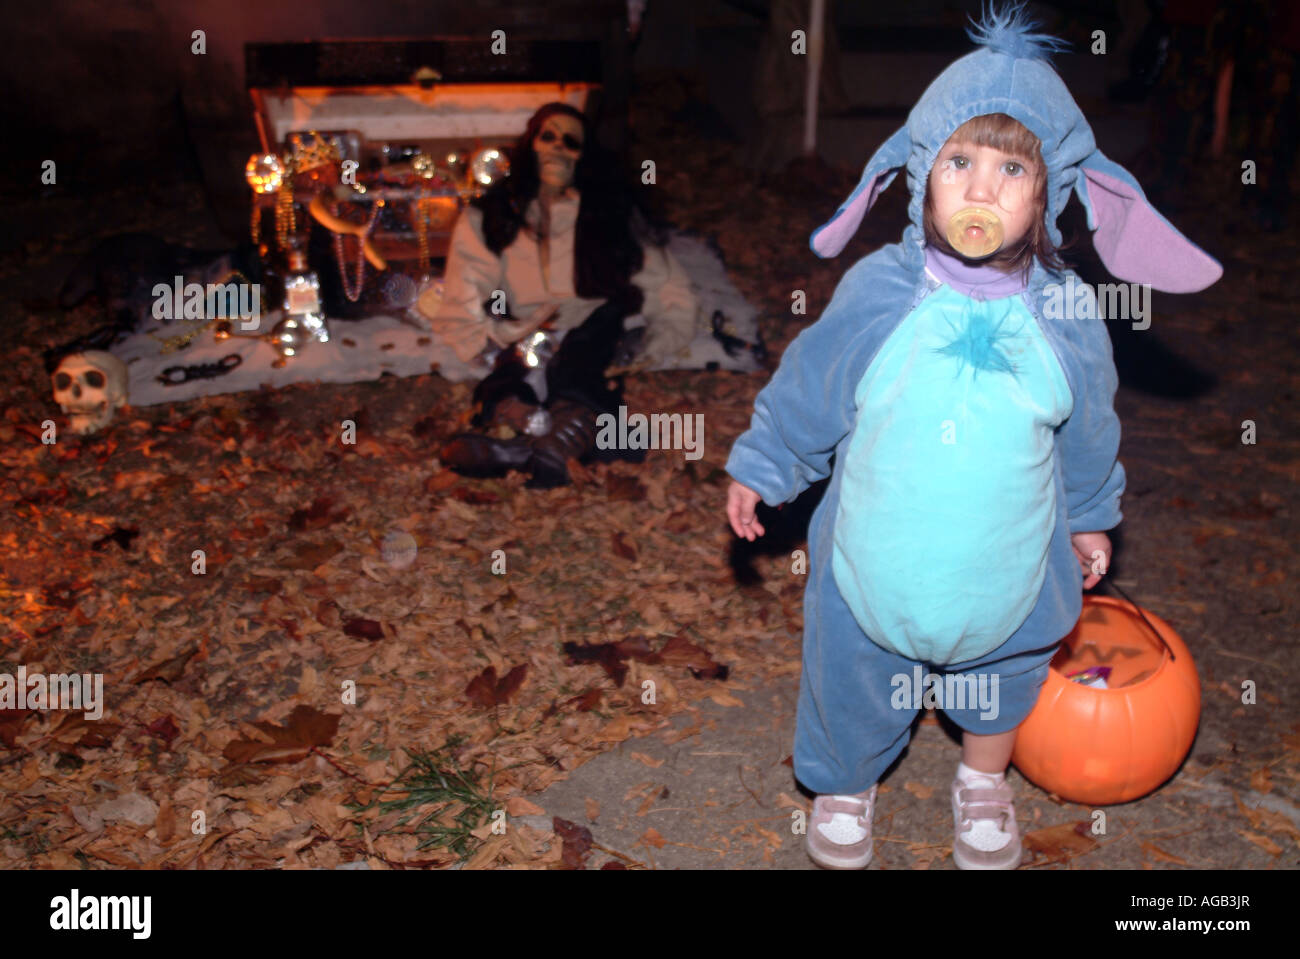 Donkey Costume Child High Resolution Stock Photography And Images Alamy